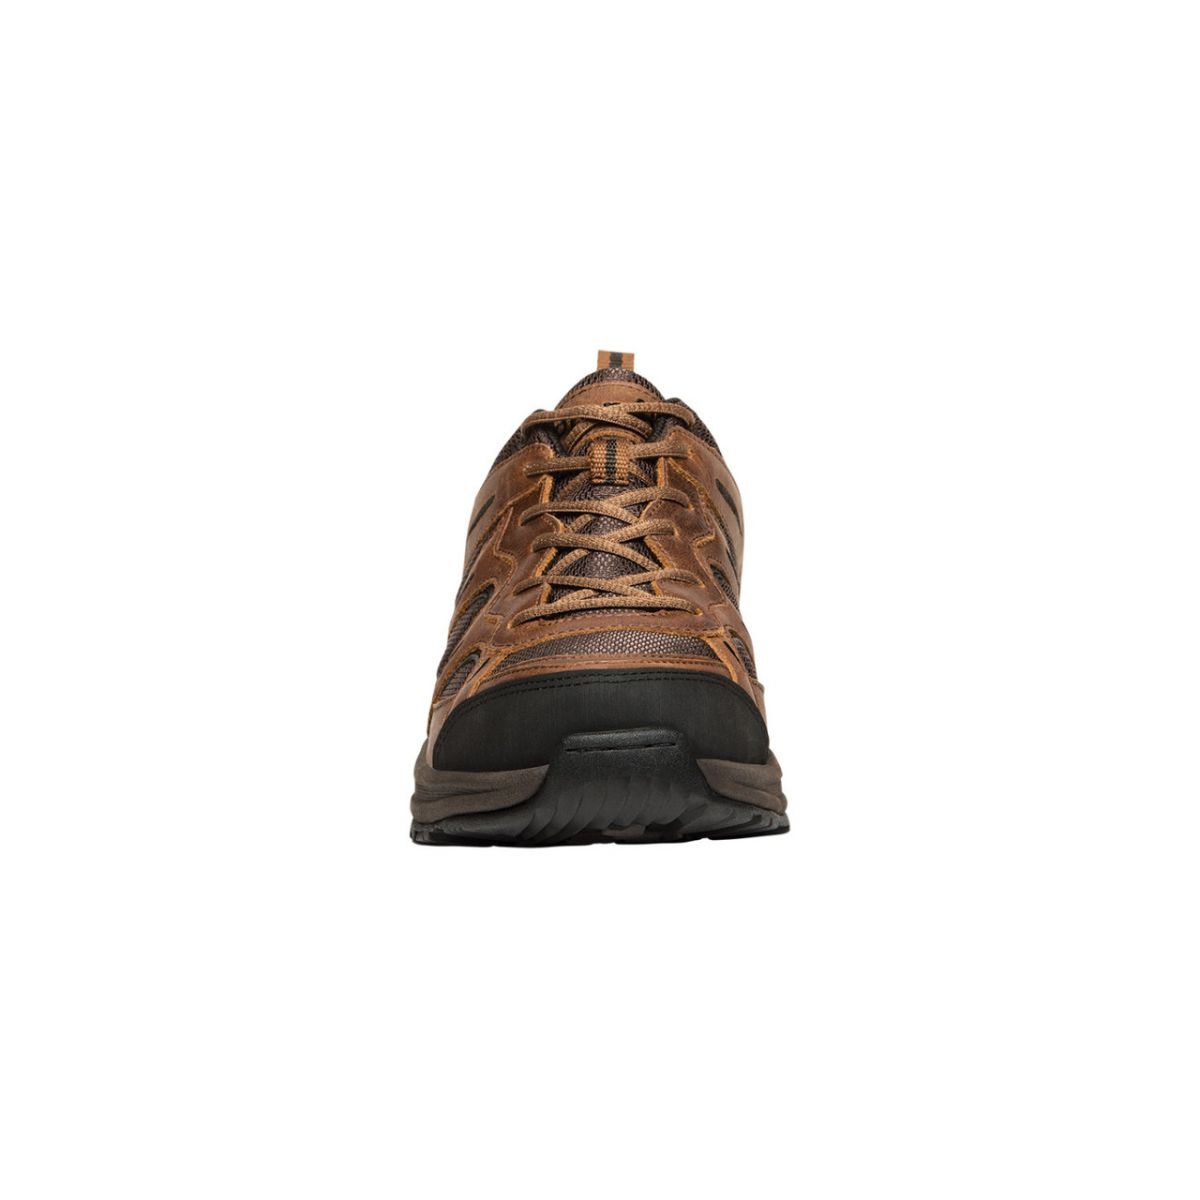 Propet Men's Connelly Hiking Shoe Brown - M5503BR BROWN - BROWN, 10.5-D